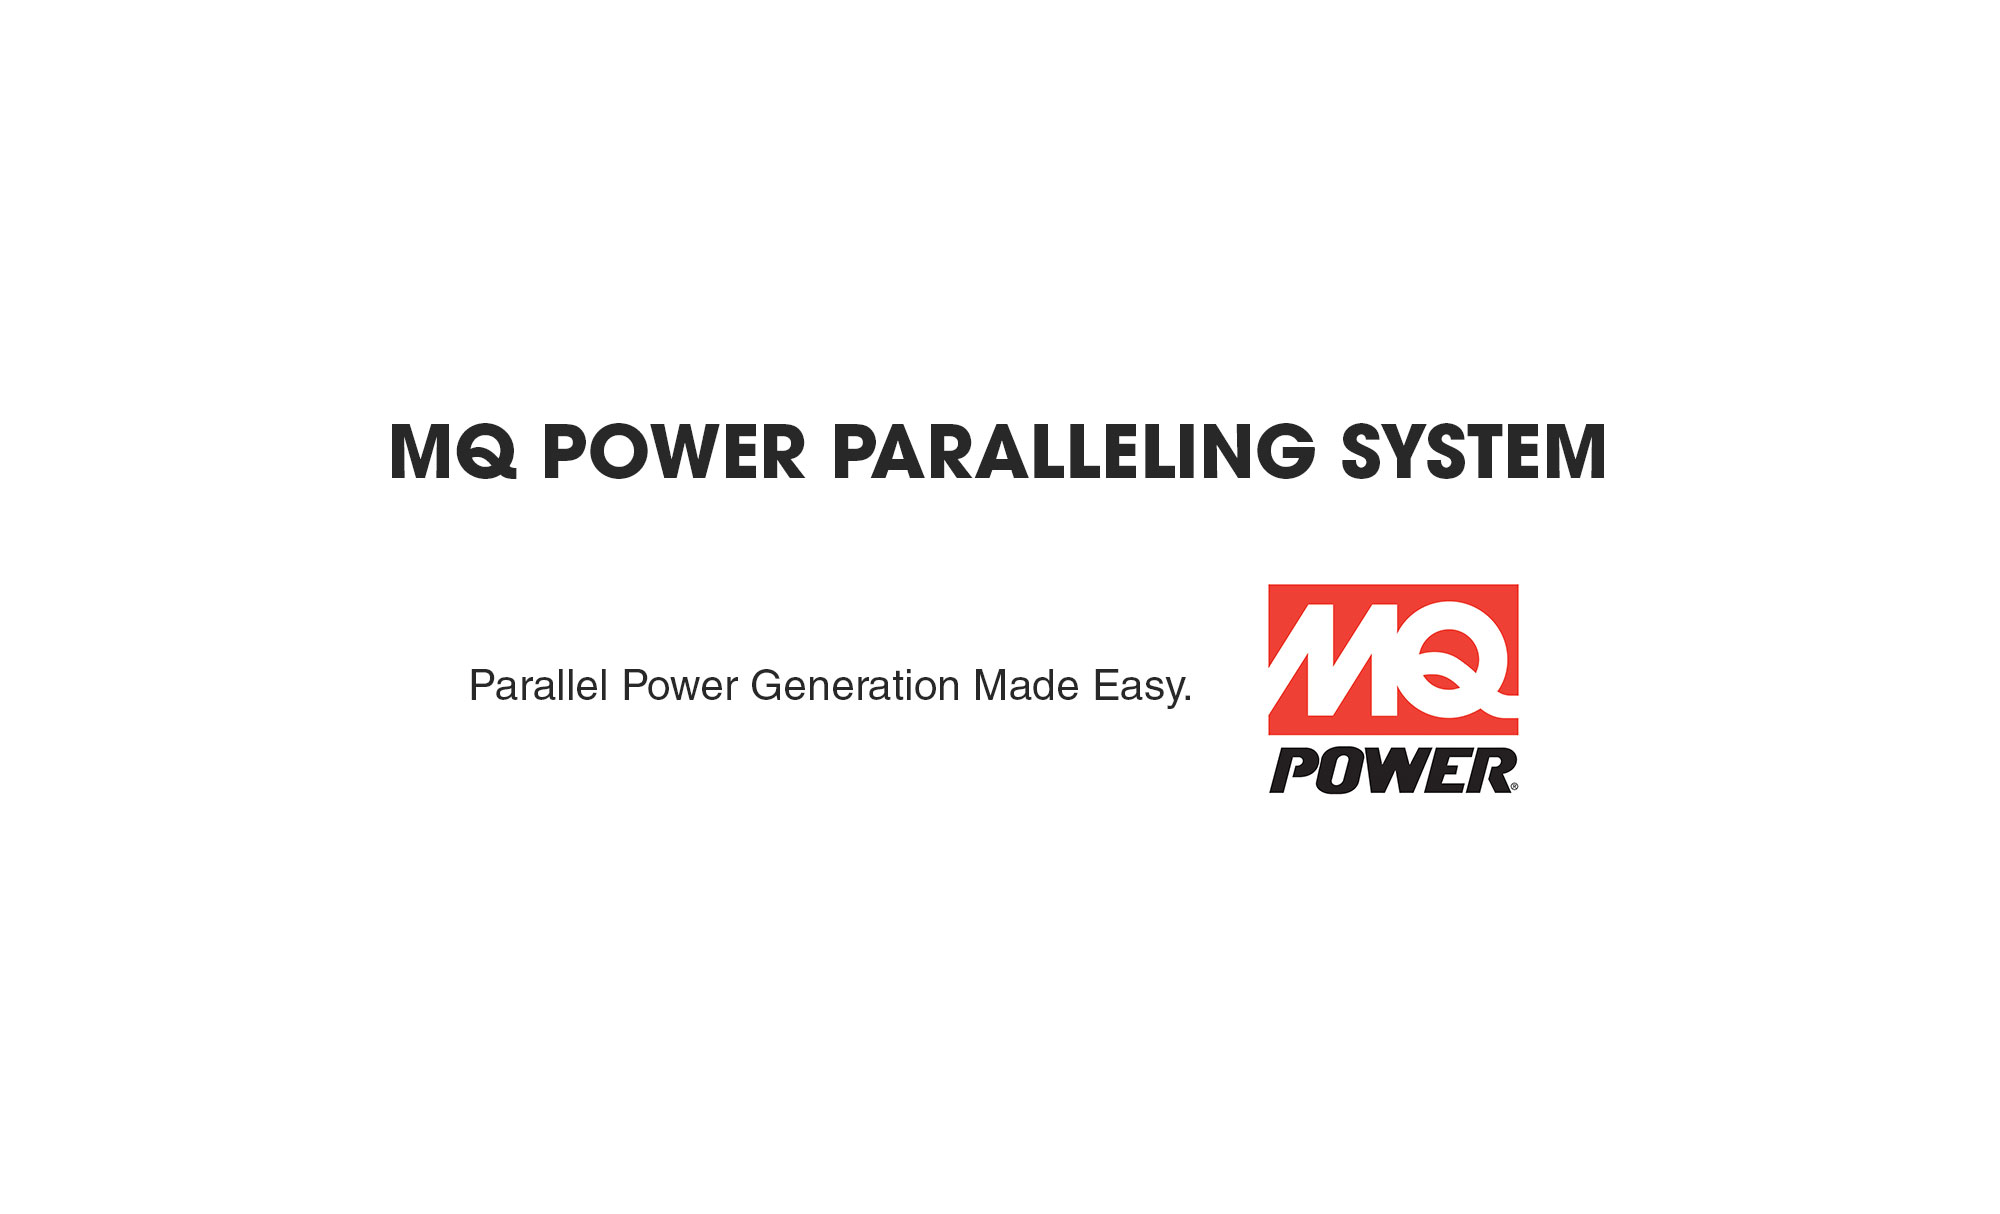 Parallel Generator Systems Made Easy